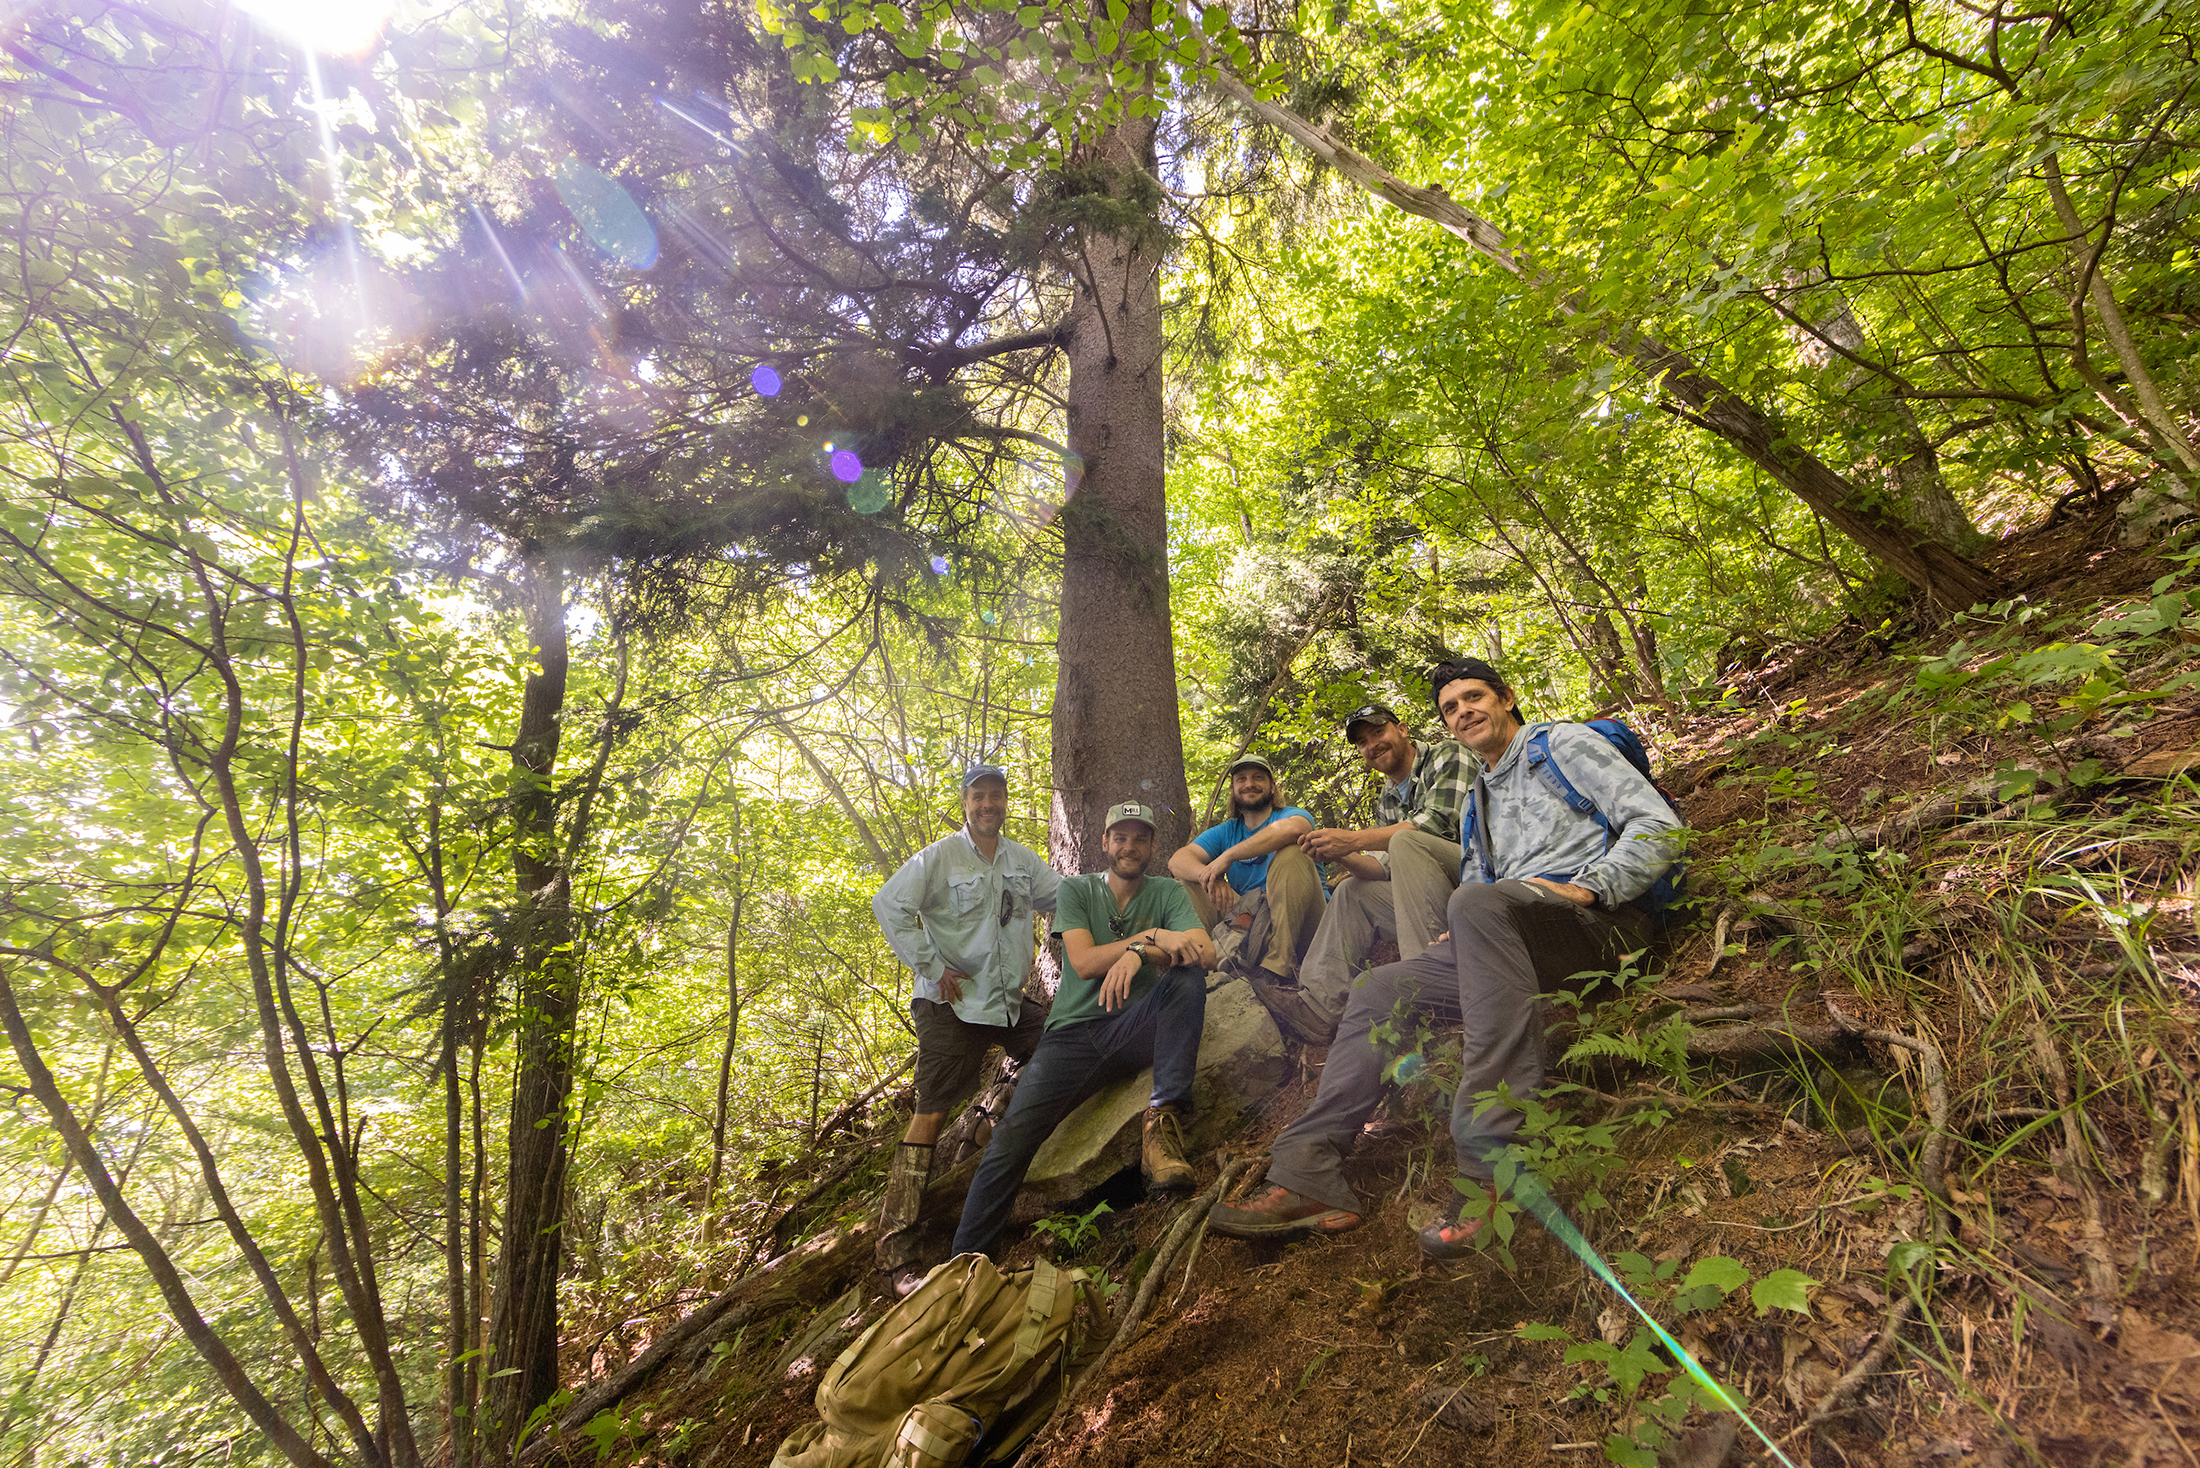 Five men sit together under a tree on a steep incline in a mountain forest. The sun creates a flare as it shines through the canopy overhead.